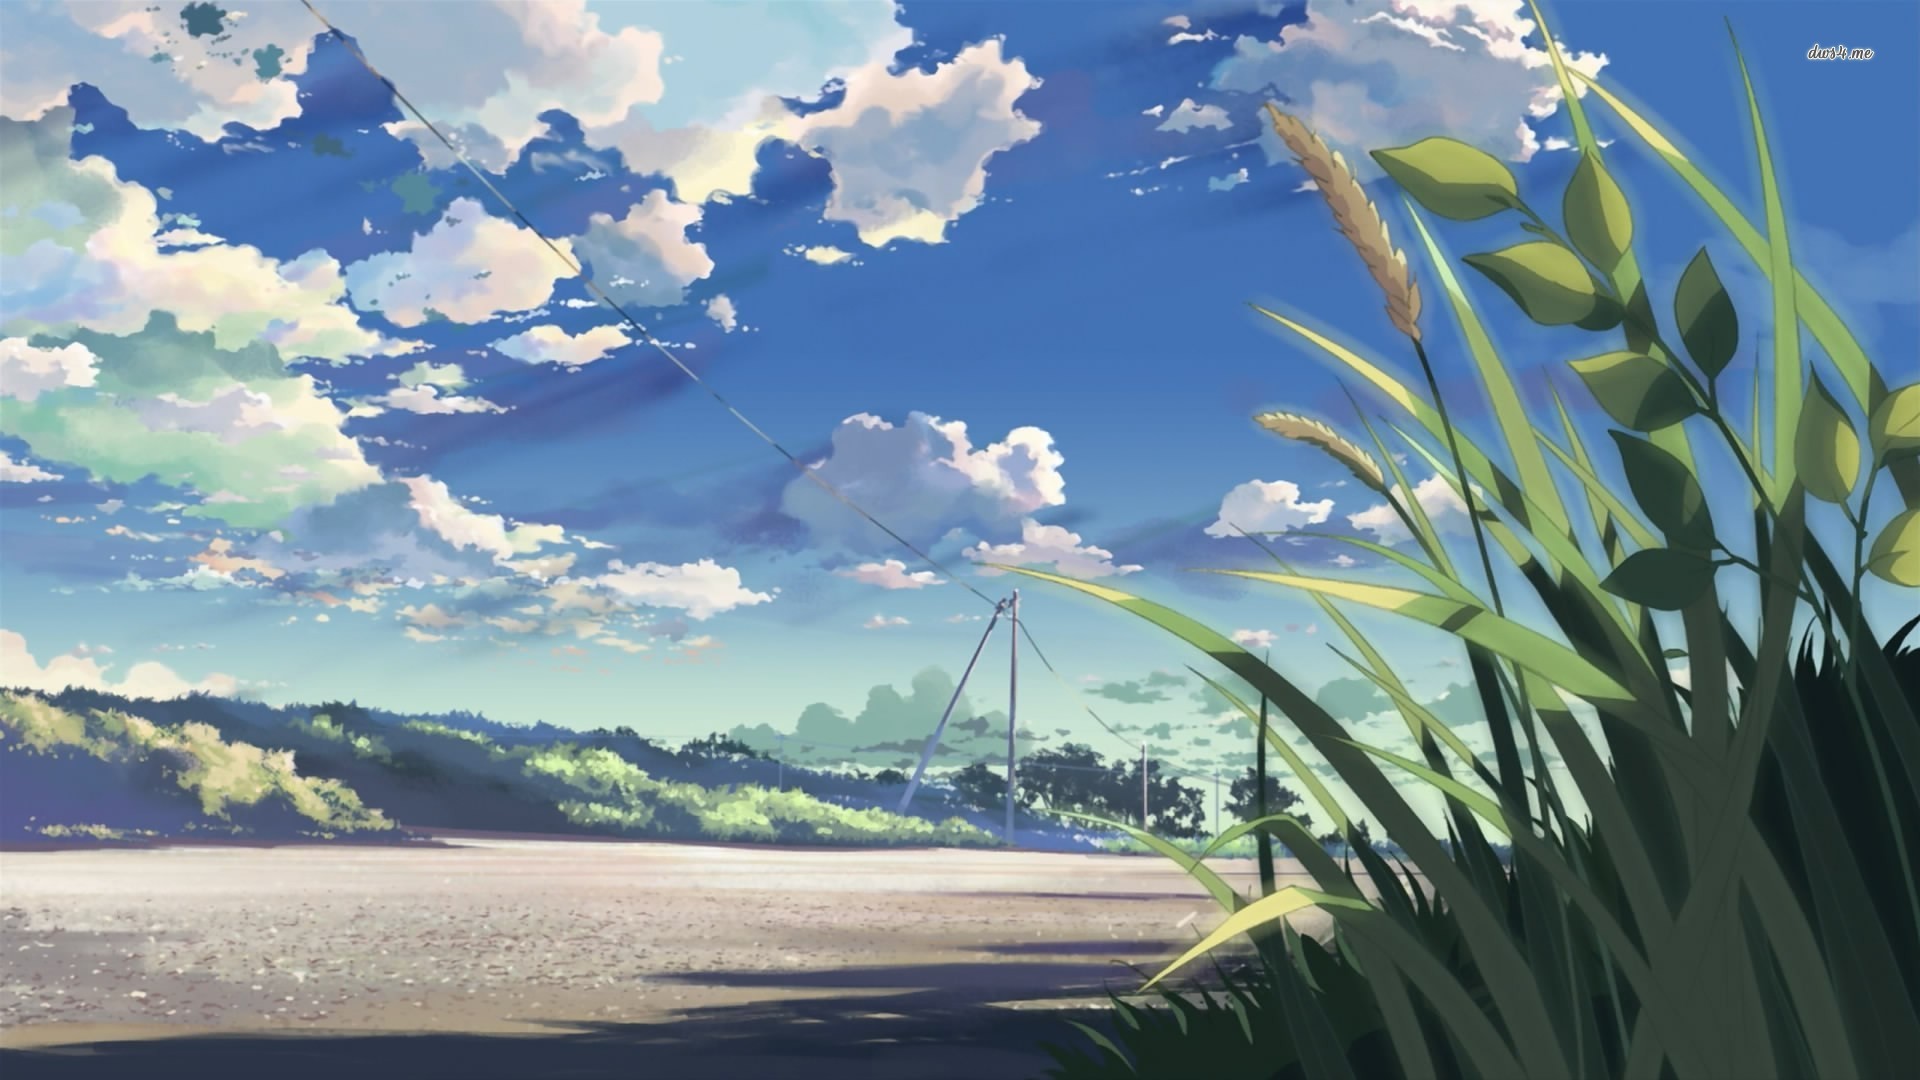 Centimeters Per Second wallpaper - Anime wallpapers - #9536